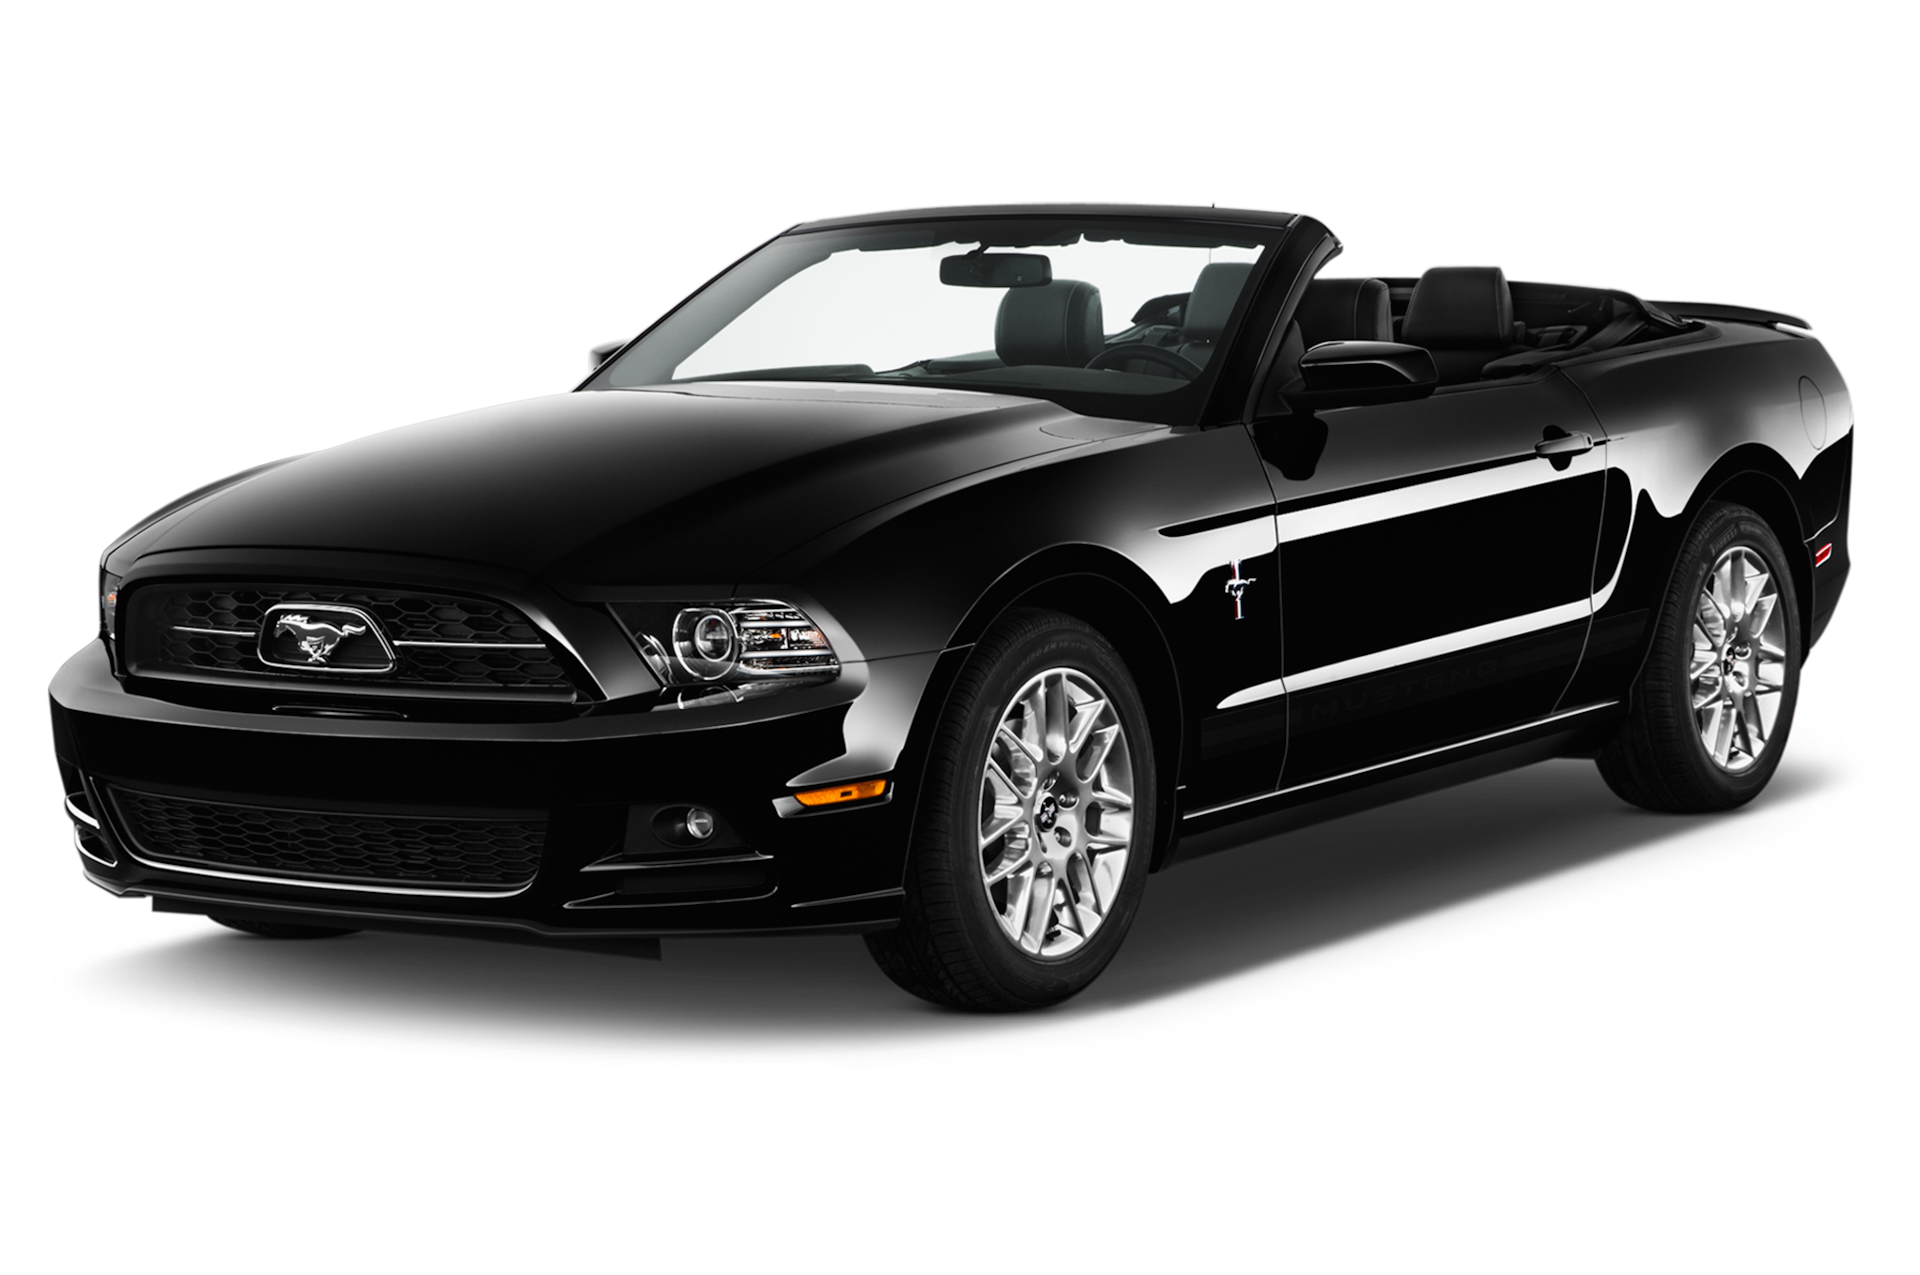 2013 Ford Mustang Prices, Reviews, and Photos - MotorTrend